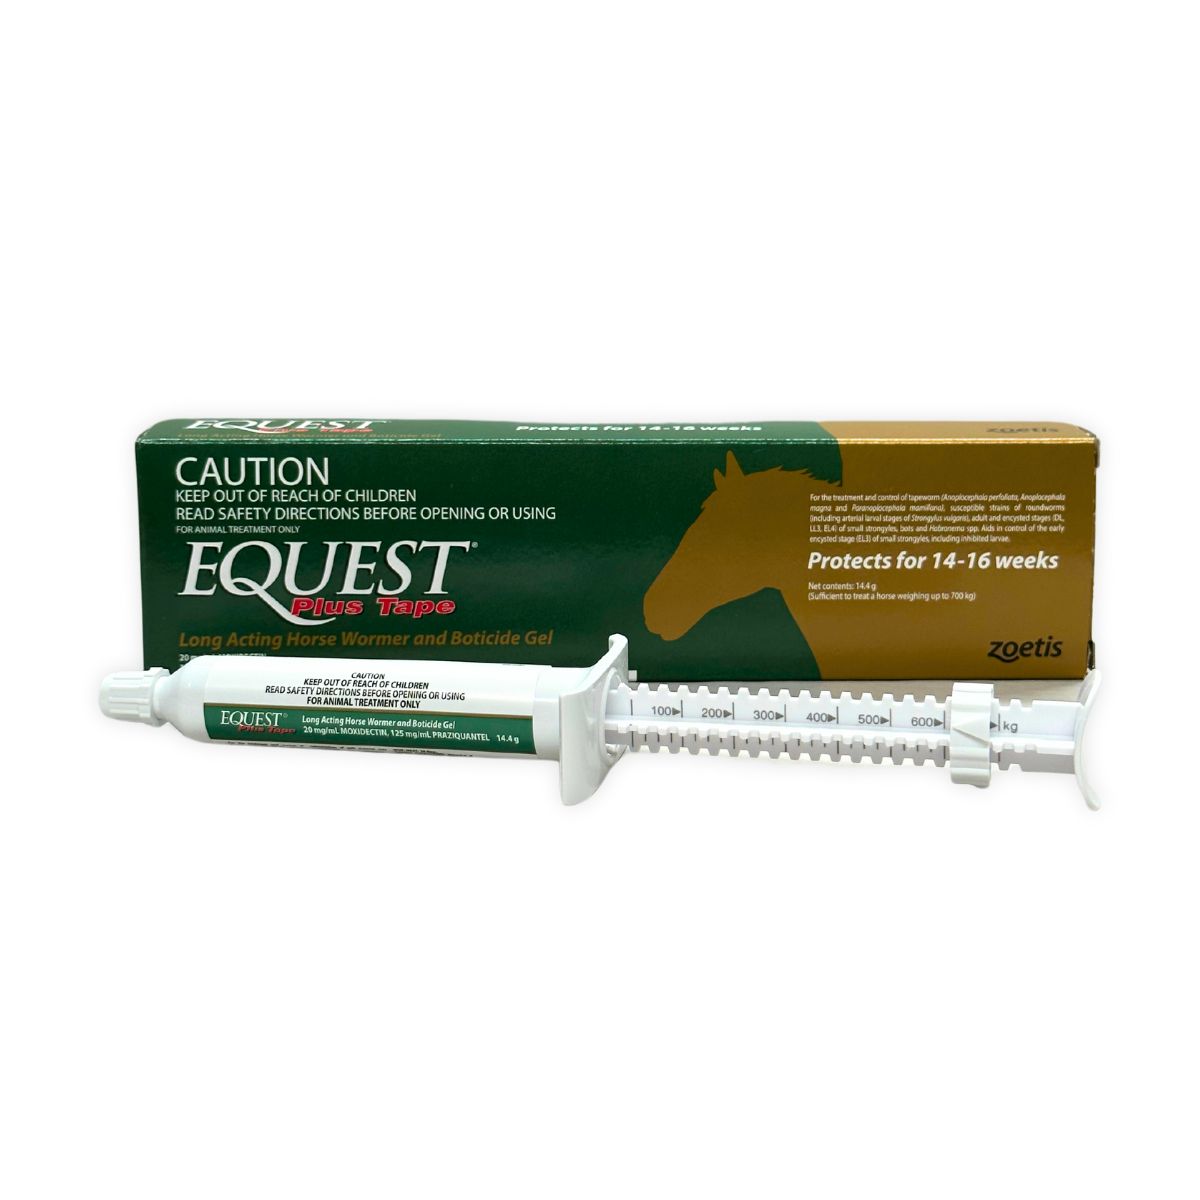 Equest Plus Tape Long Acting Horse Wormer and Boticide Gel 14.4g -  vet-n-pet DIRECT